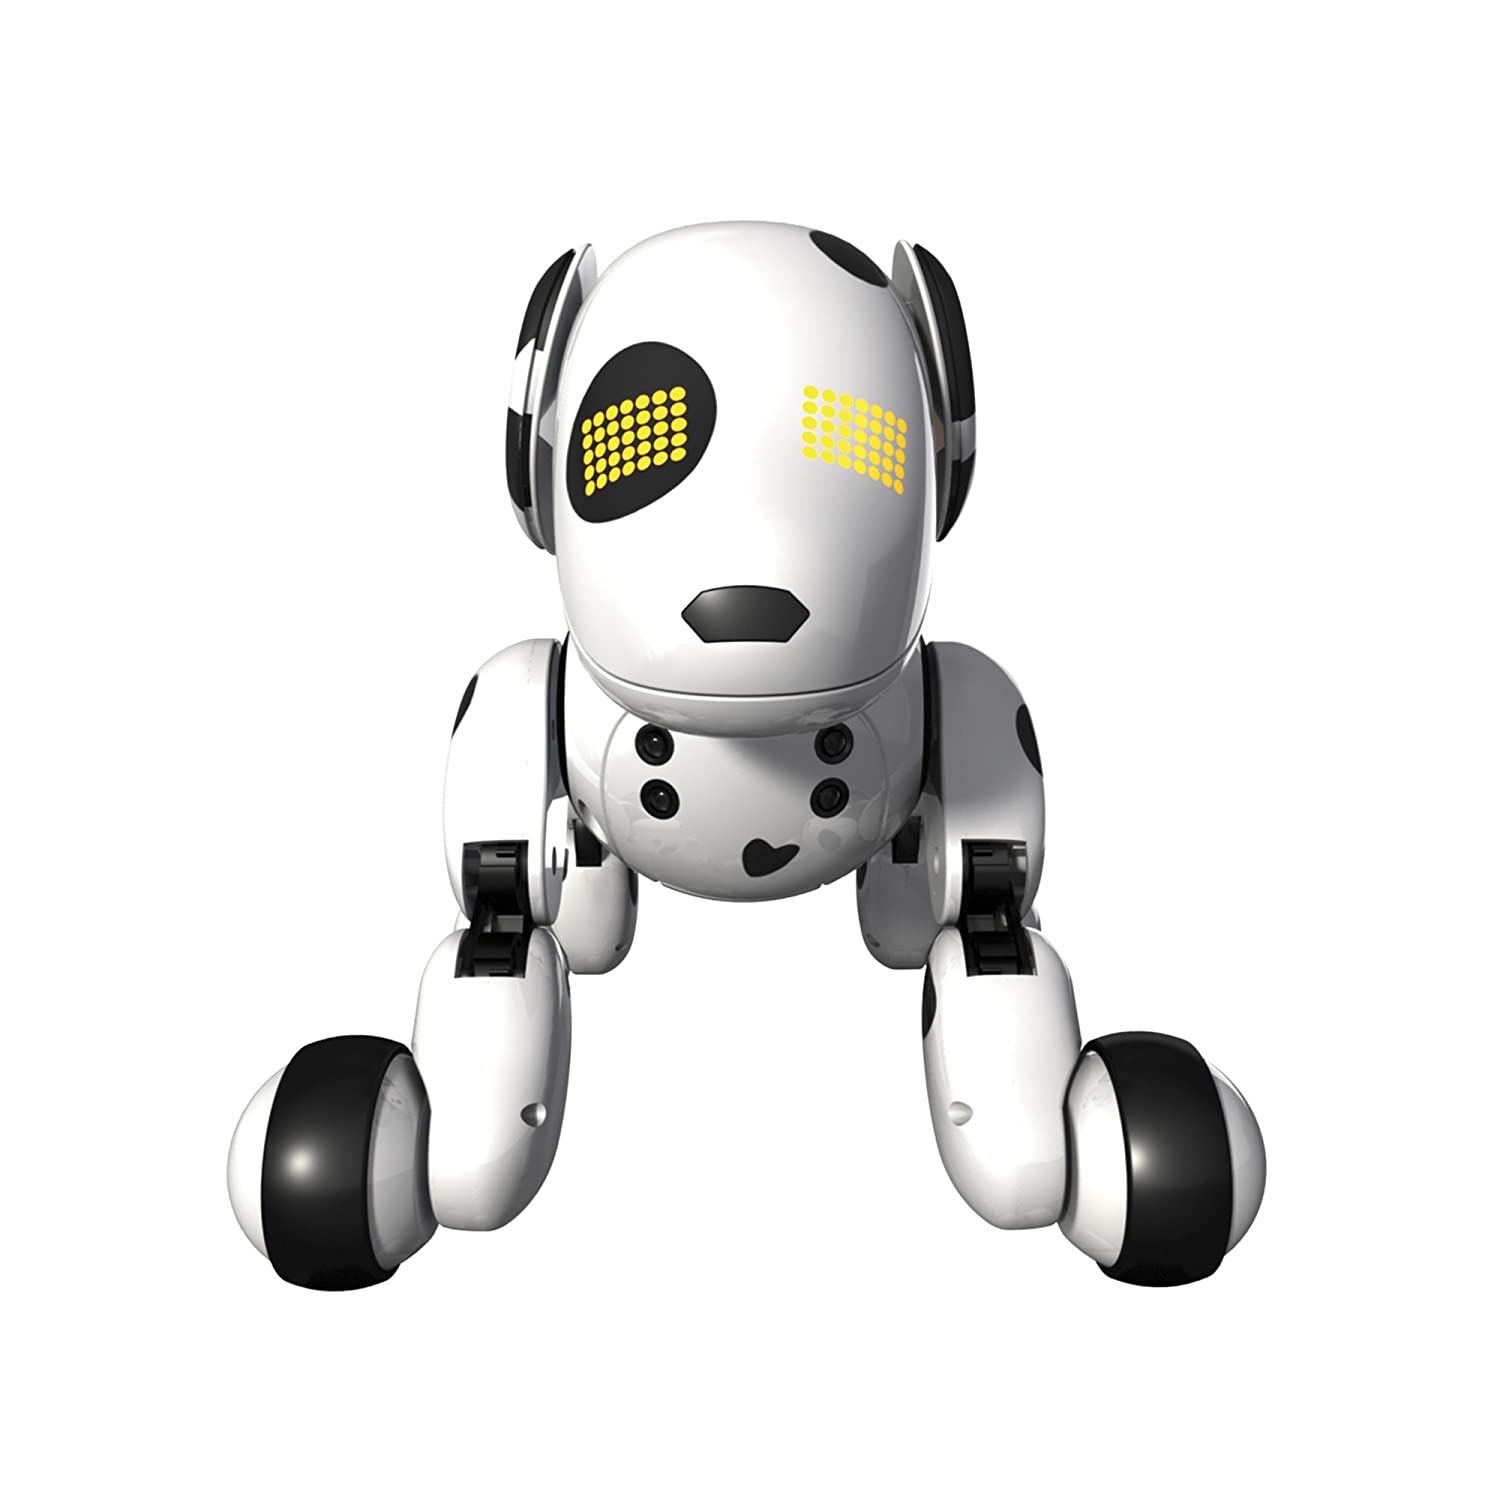 Top 9 Best Robot Pets for Kids Reviews in 2022 7